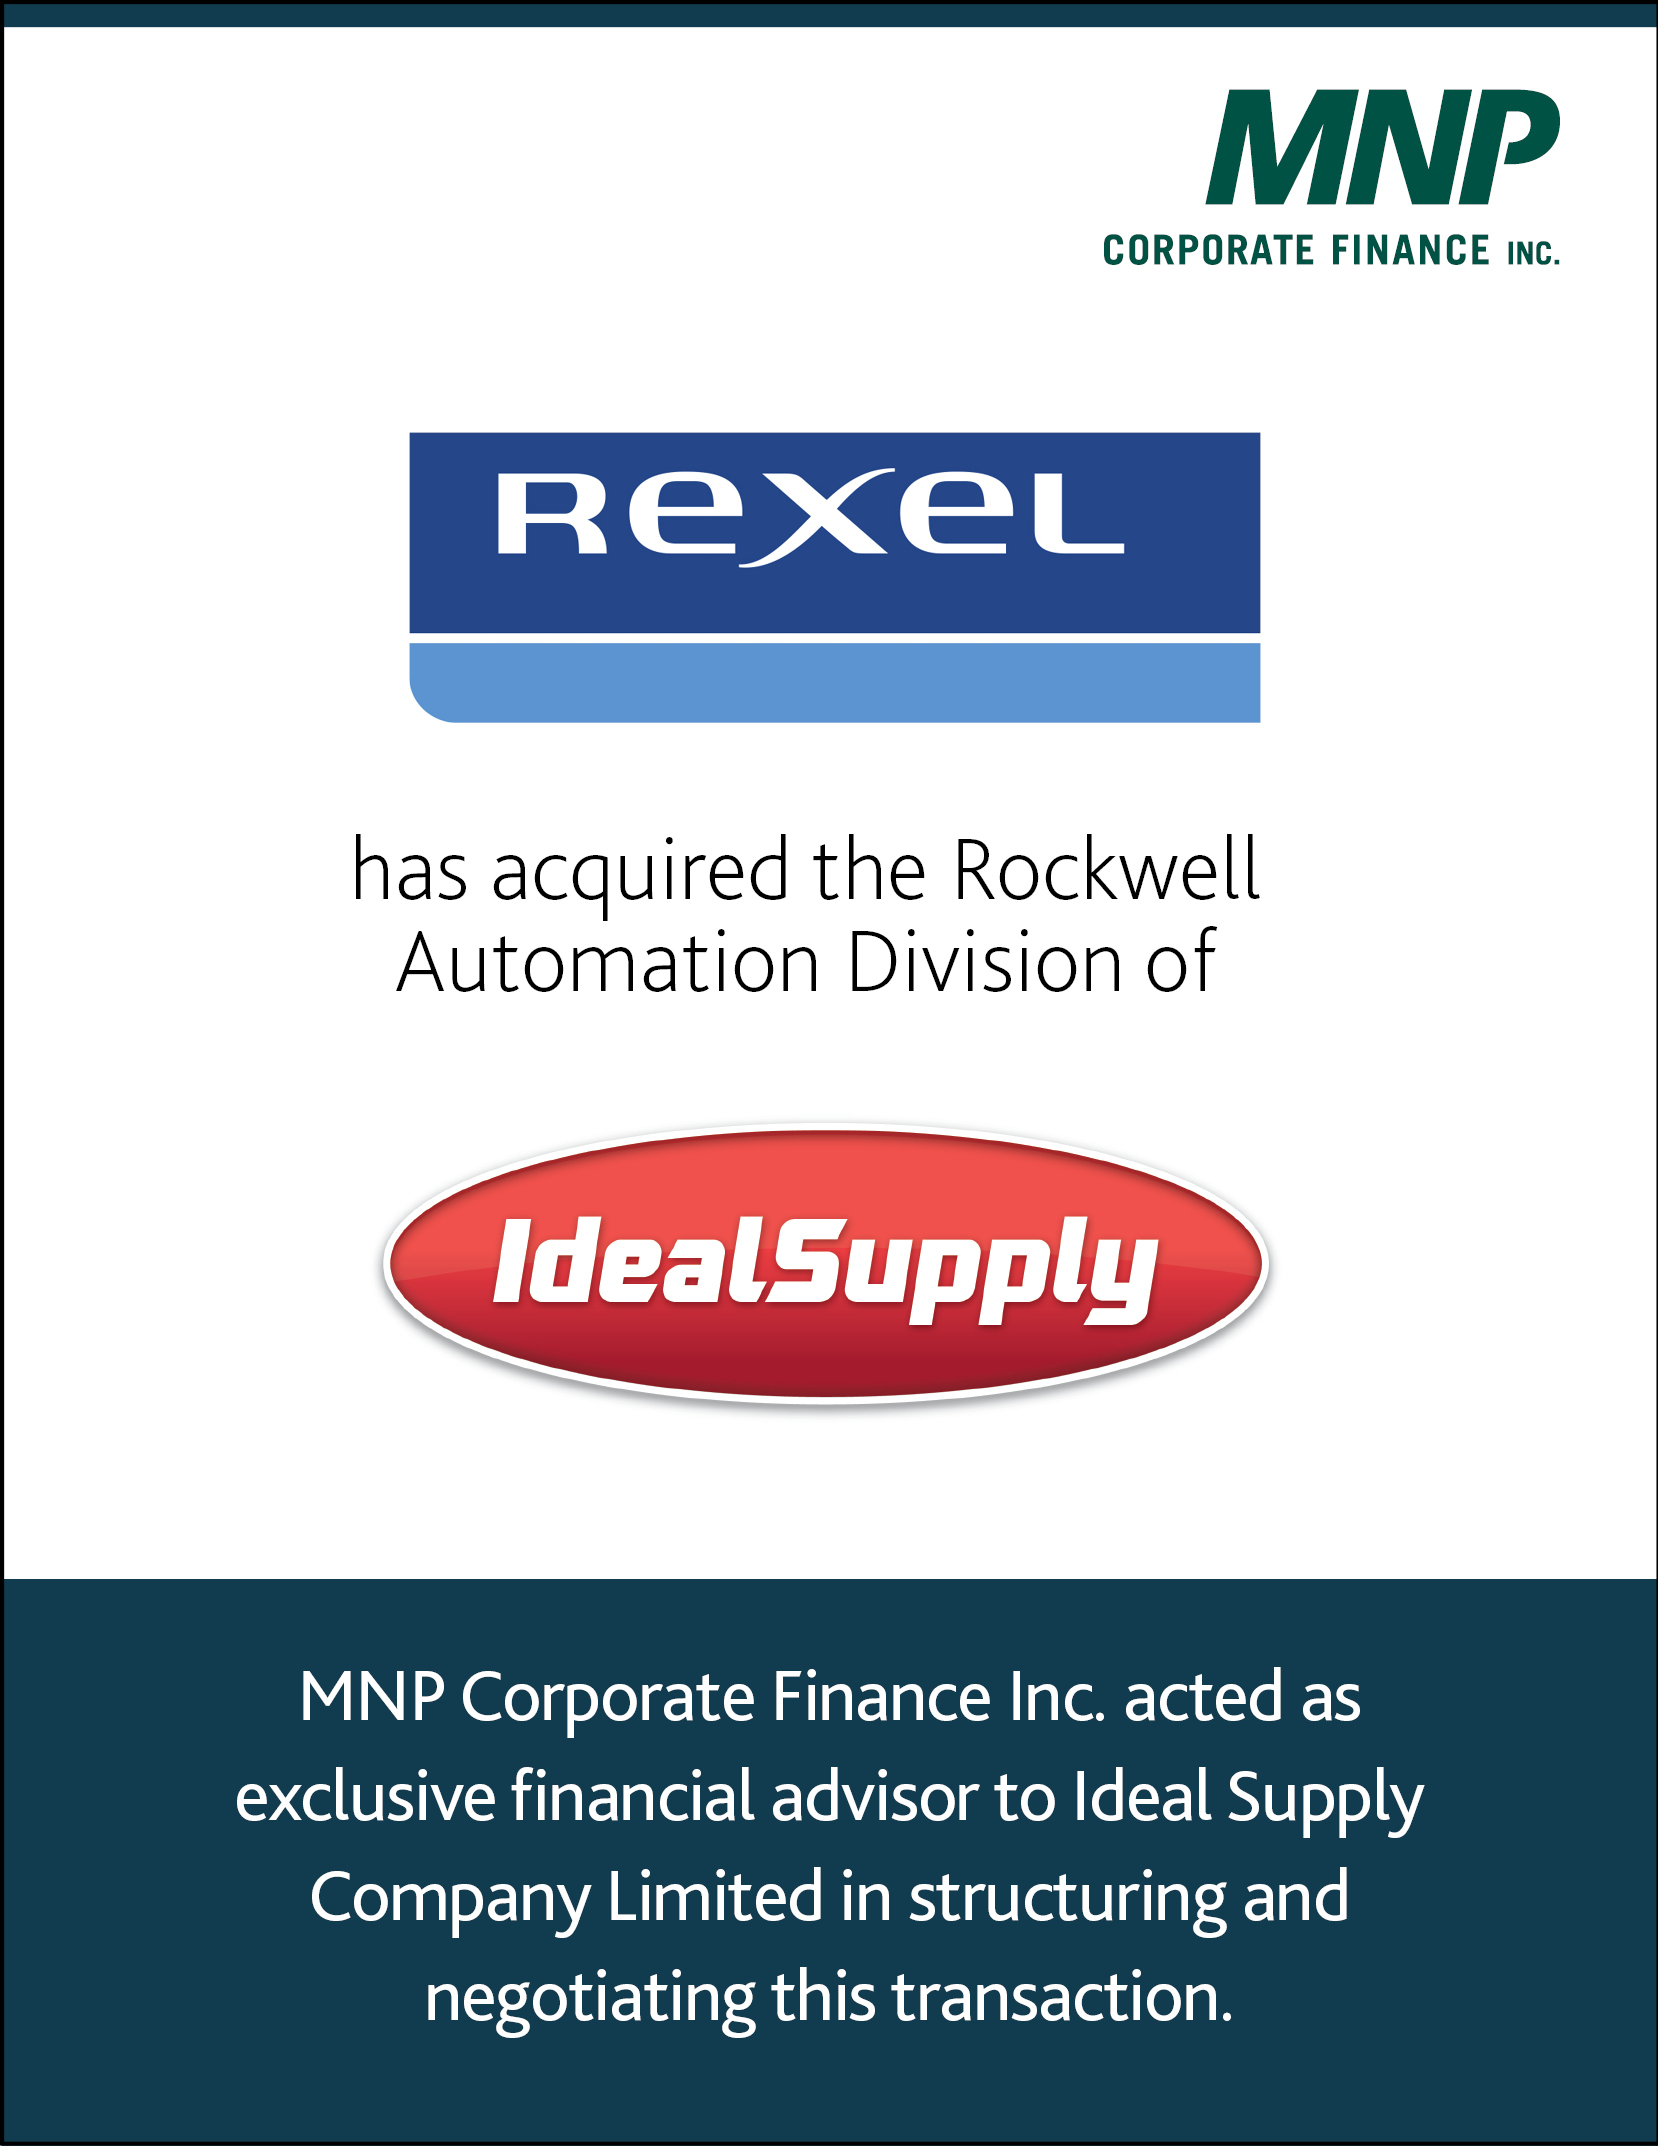 Rexel has acquired the Rockwell Automation Division of Ideal Supply. 